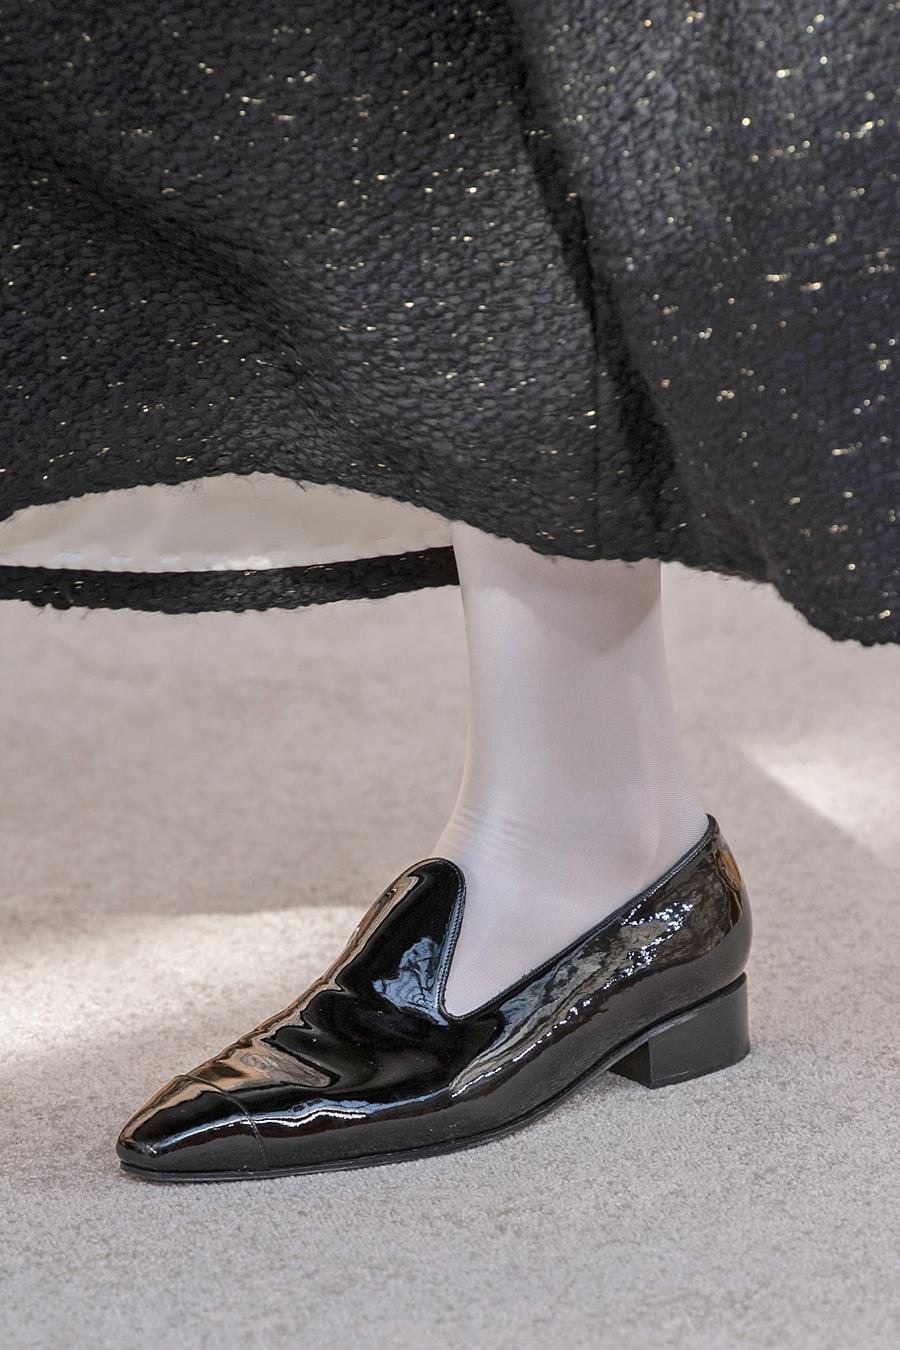 chanel fall 2019 shoes